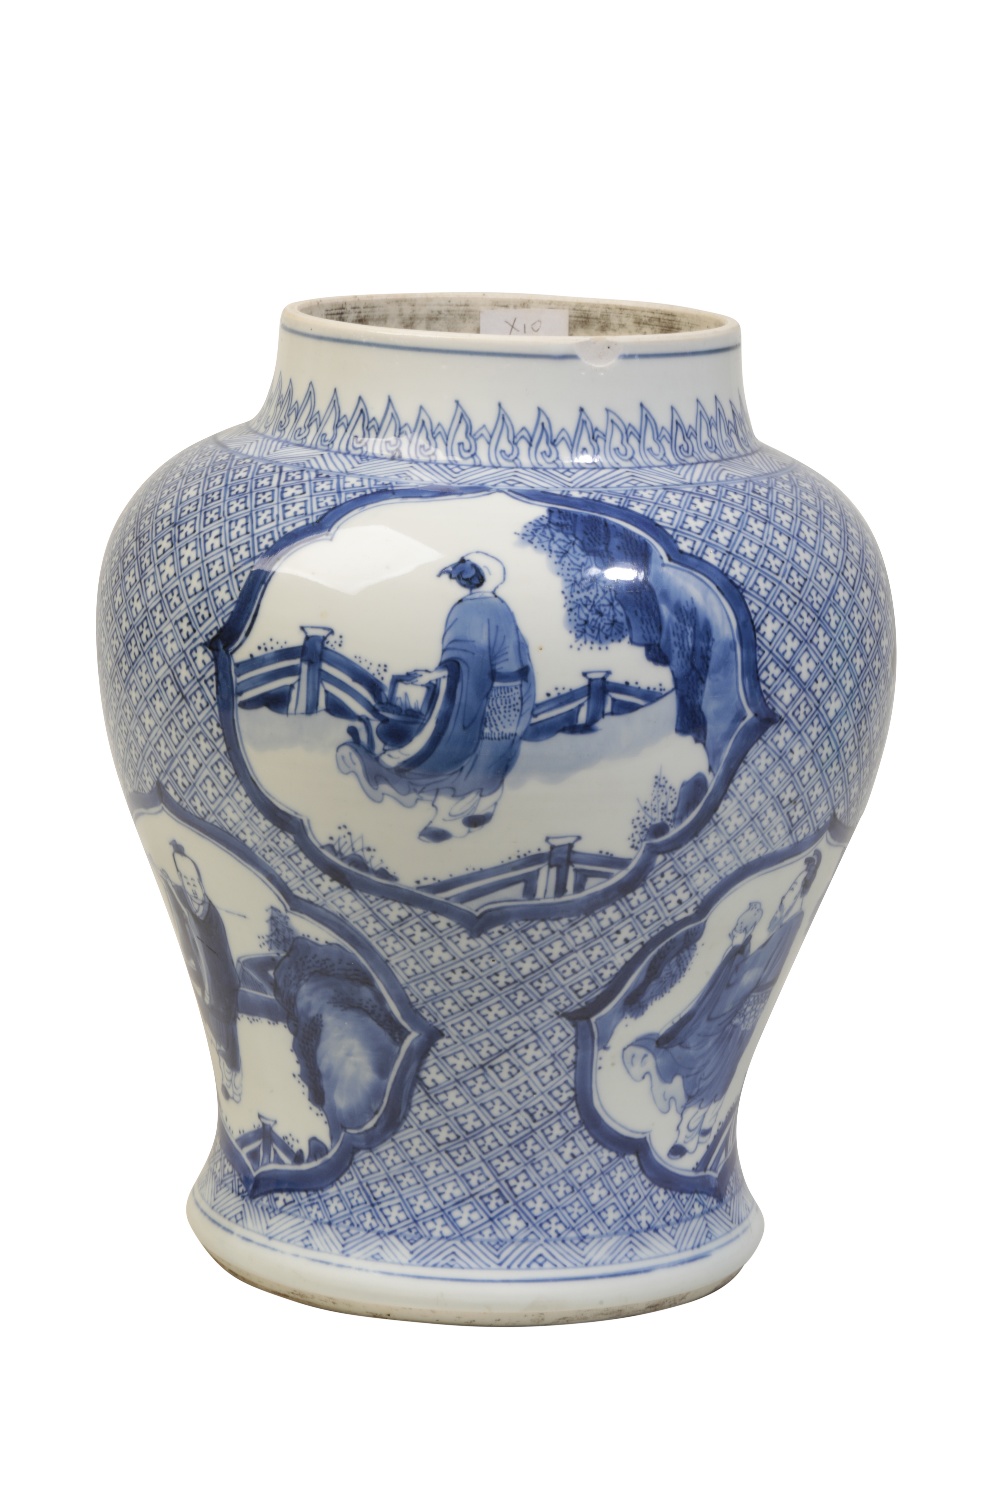 BLUE AND WHITE MEIPING, KANGXI PERIOD - Image 3 of 3